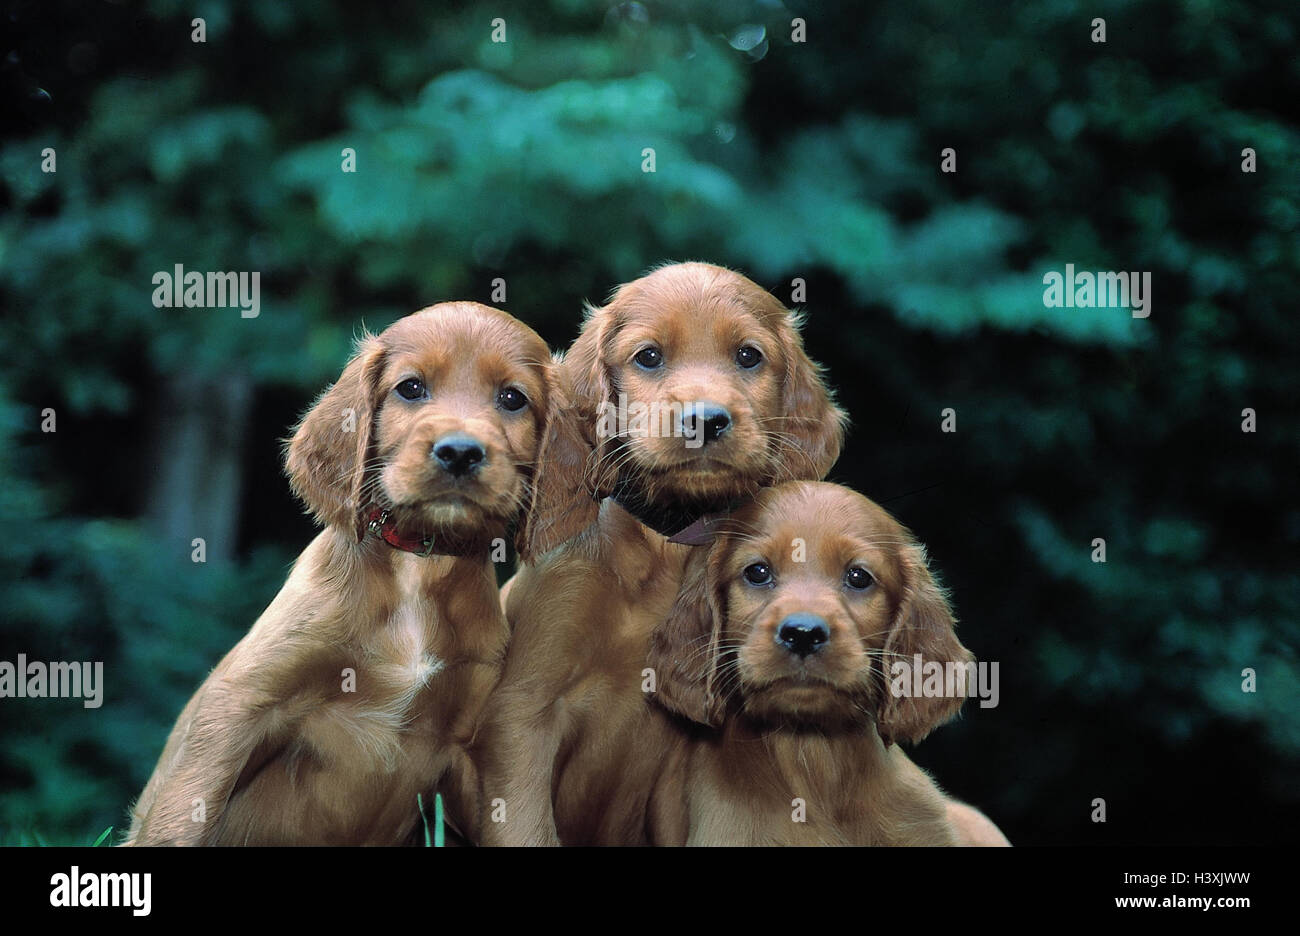 Irish setter, puppy, portrait, outside, animals, mammals, Irish setters, three, dogs, Canidae, young, young animals, red spaniel, accompanying dogs, puppies, pedigree dogs, dog breed, pets, hounds Stock Photo